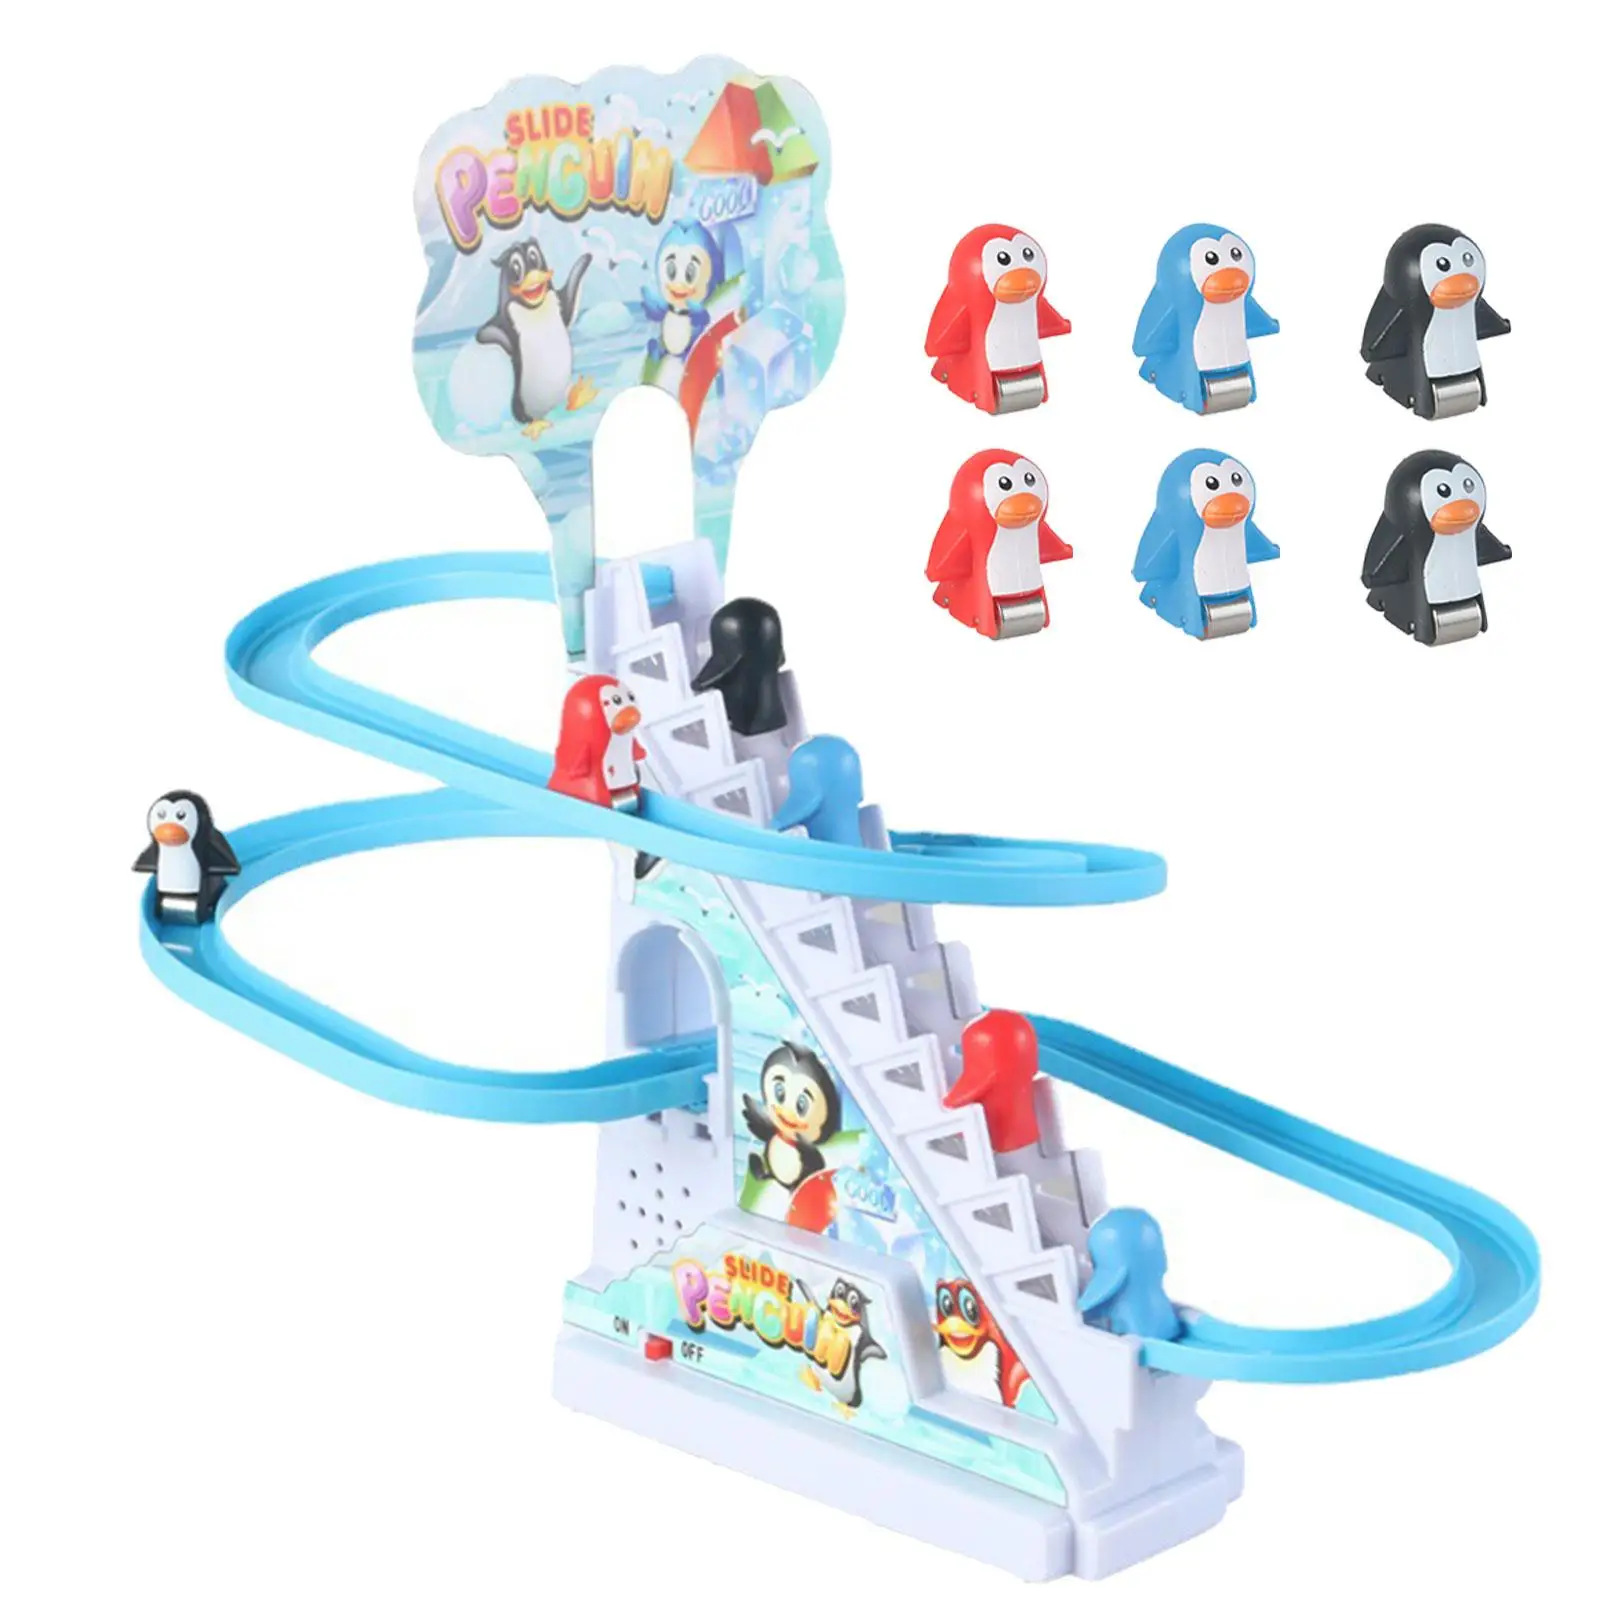 

Penguin Track Slide Toys with 12 Penguins Electric Race Track Game Small Penguin Toy stair for Toddlers Kids Children Gifts